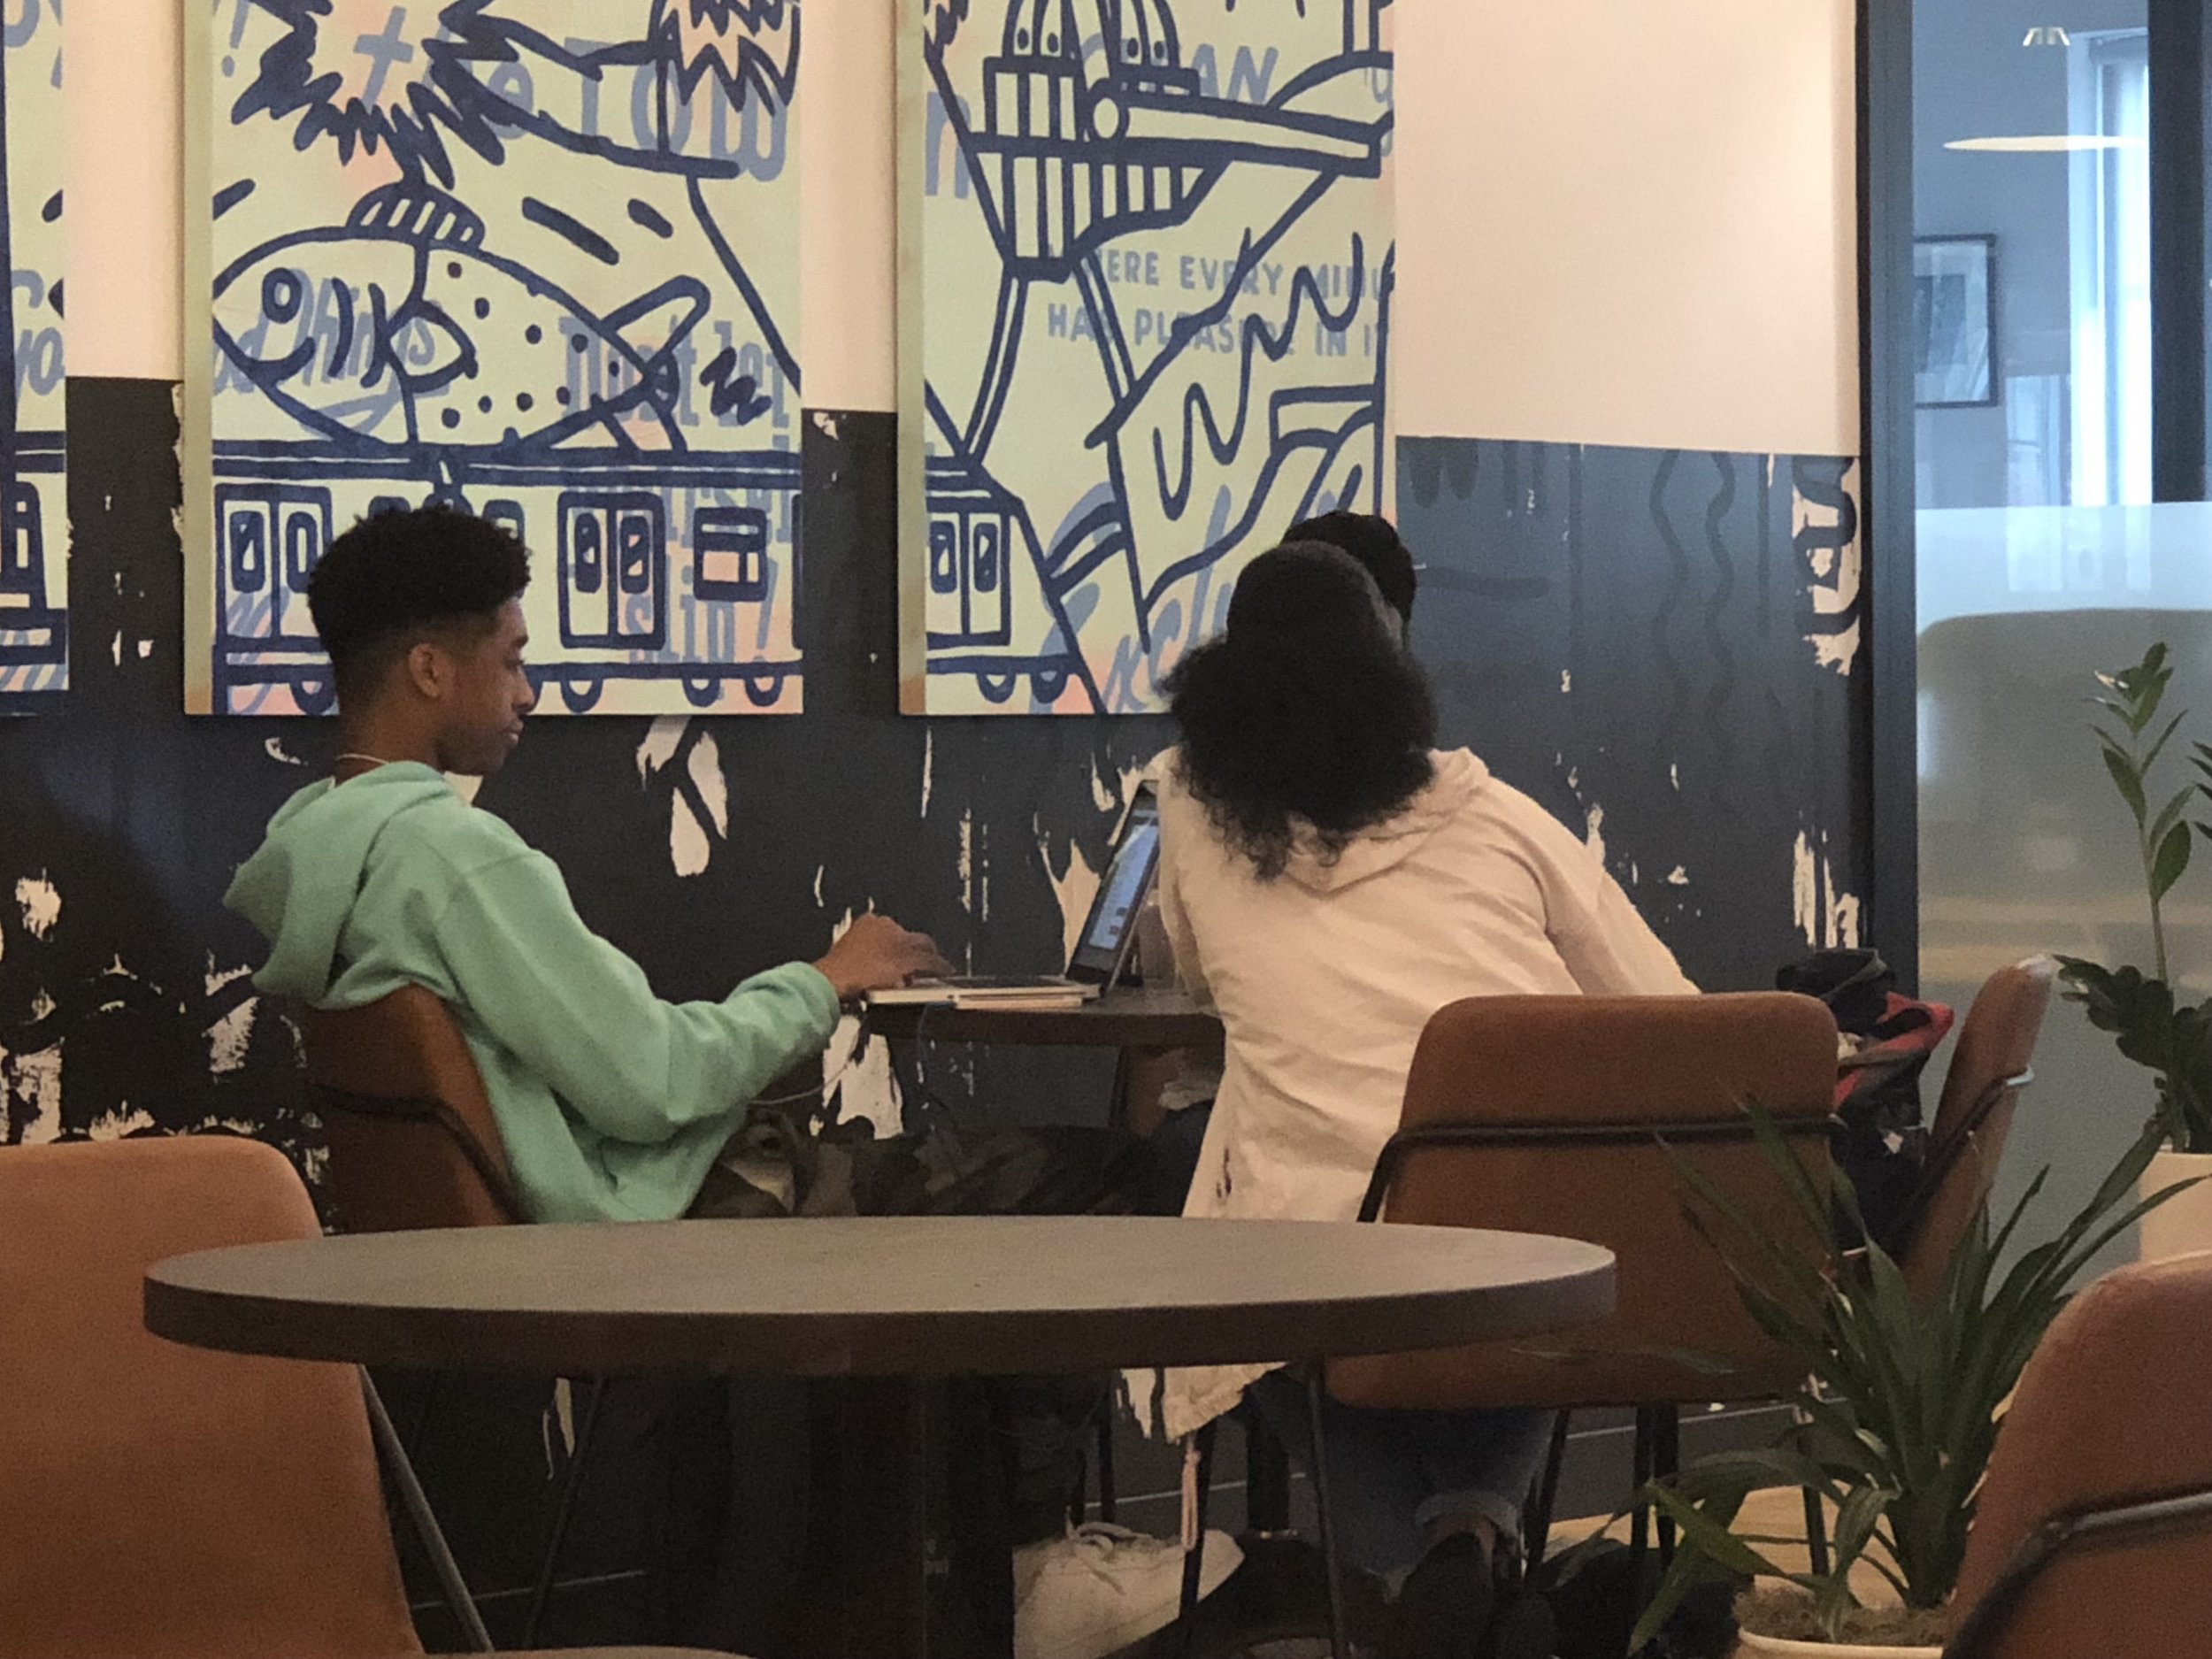  Our Youth Strategists, Brandon Alston and Kayla Boodoo building a project schedule for Technology for Children Africa in WeWork. 